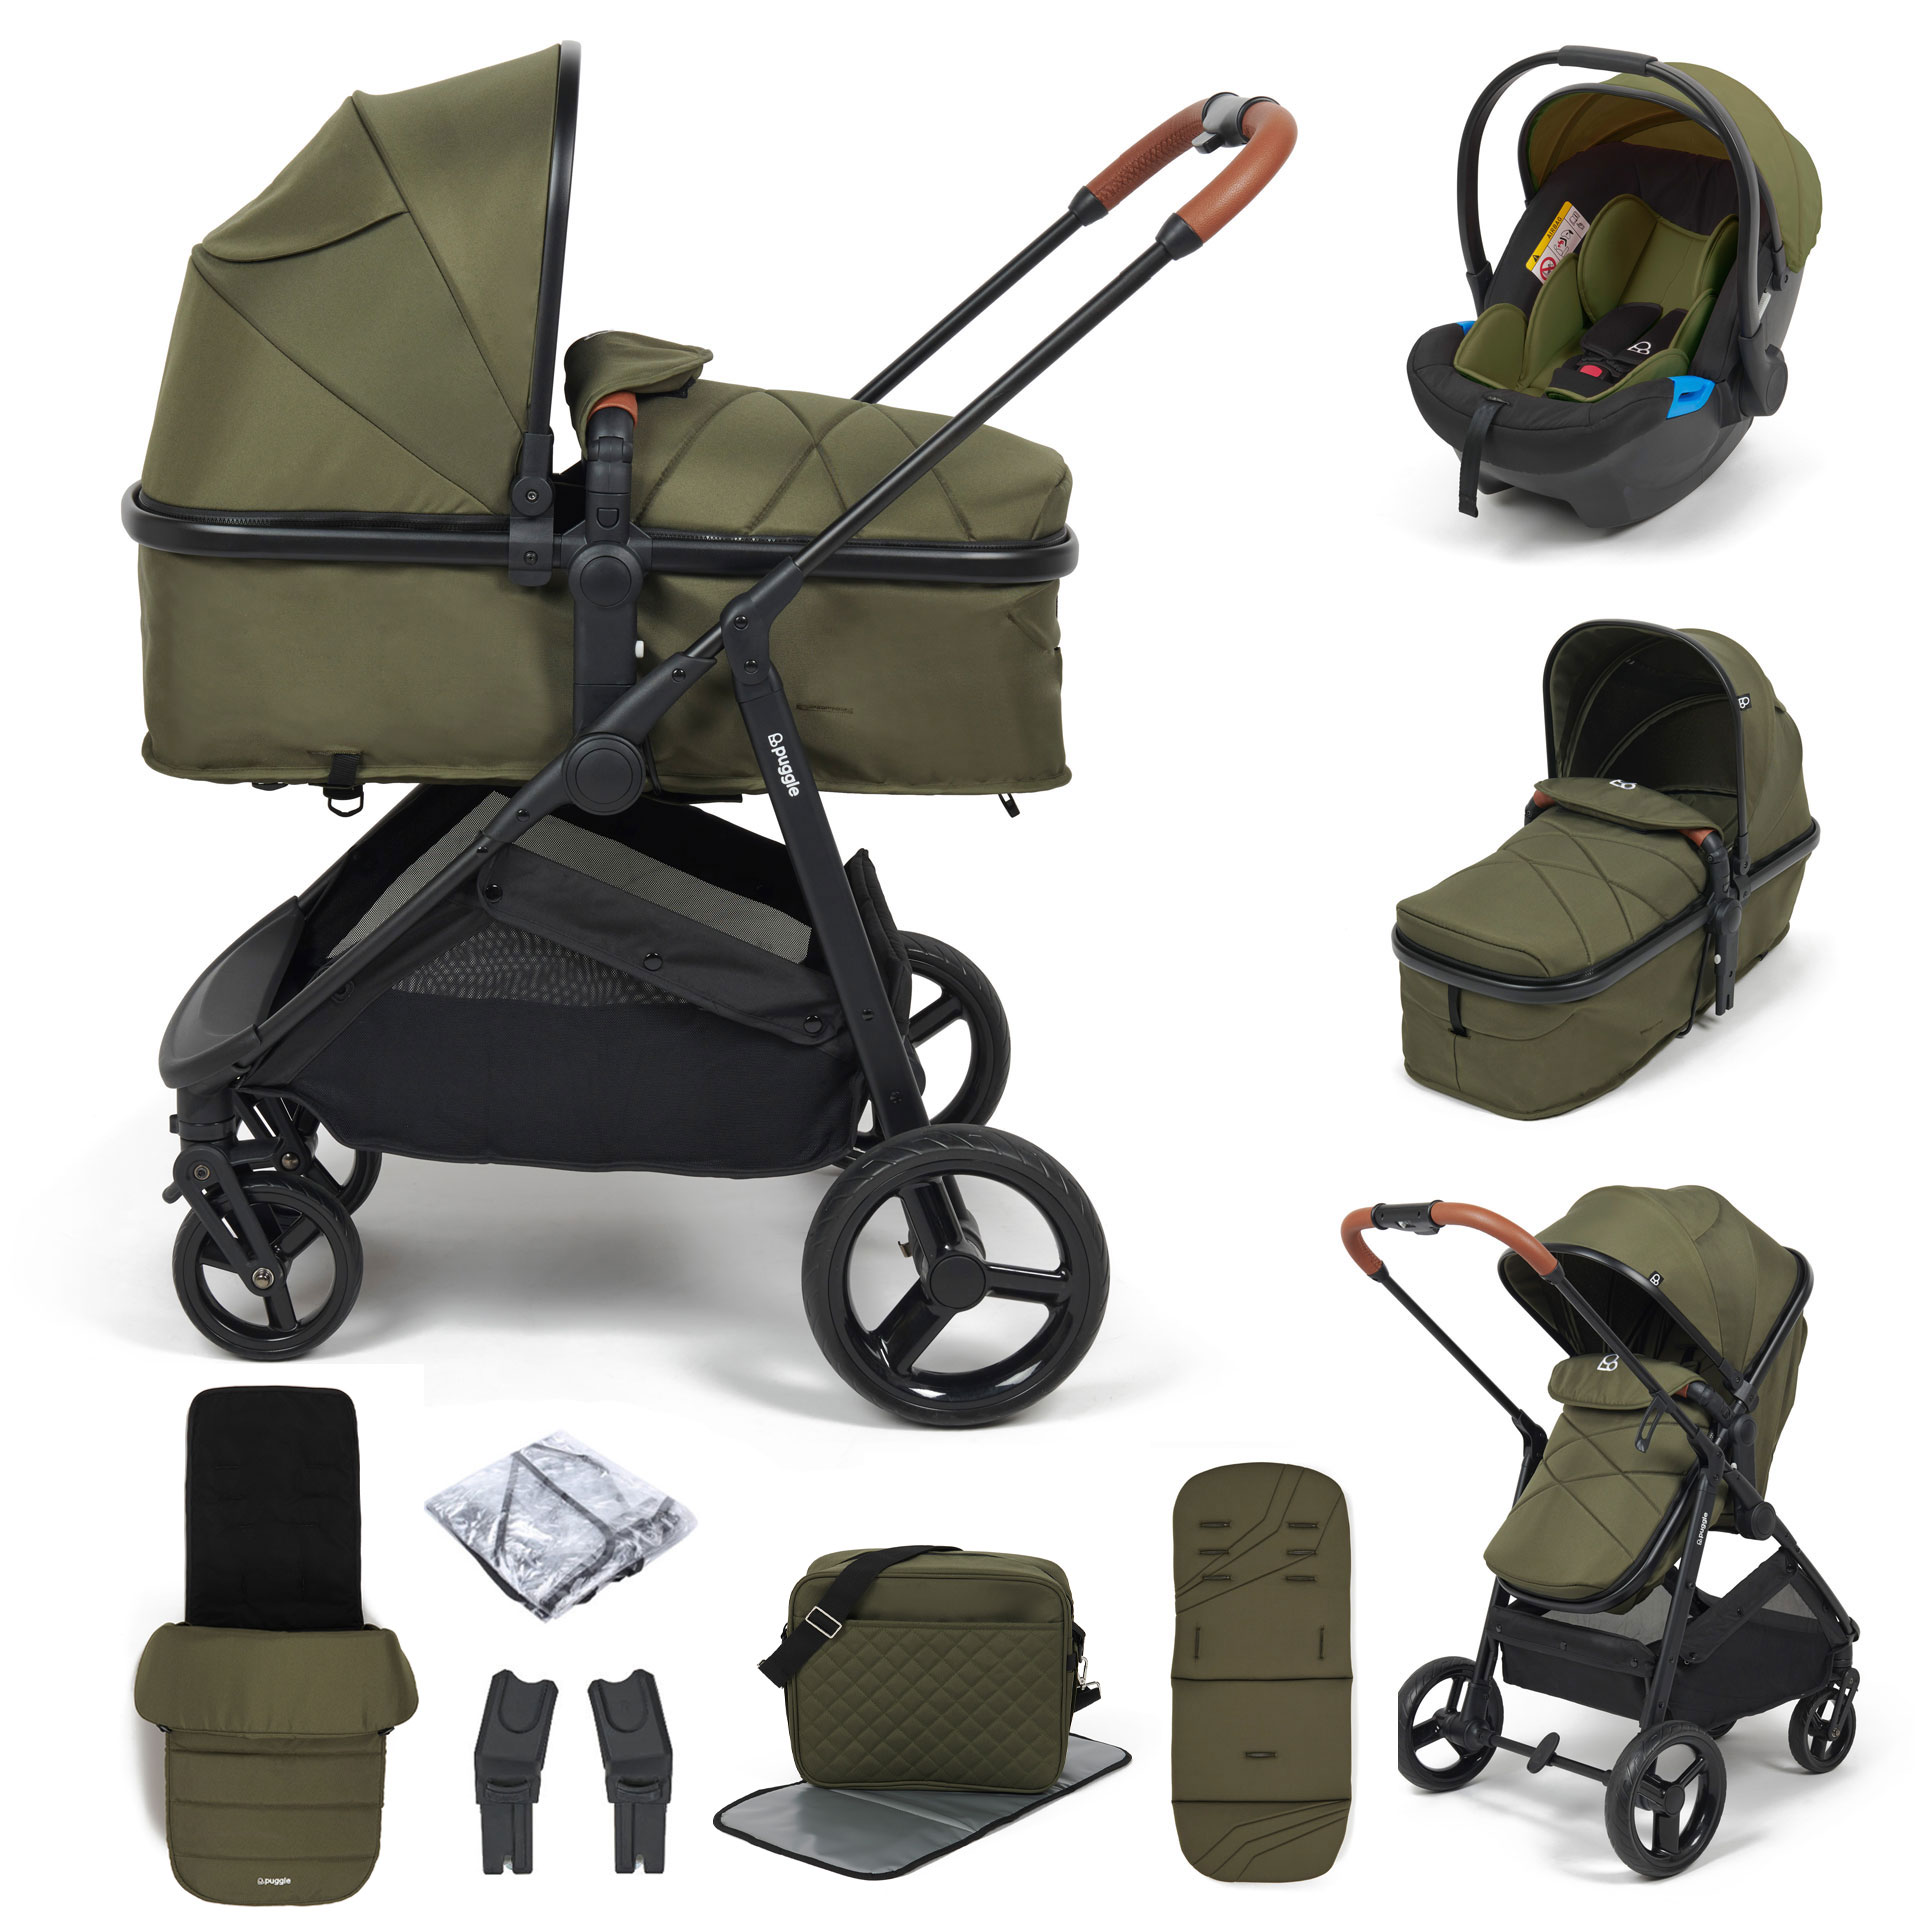 Puggle Monaco XT 2in1 Pushchair Travel System with Footmuff & Bag - Forest Green